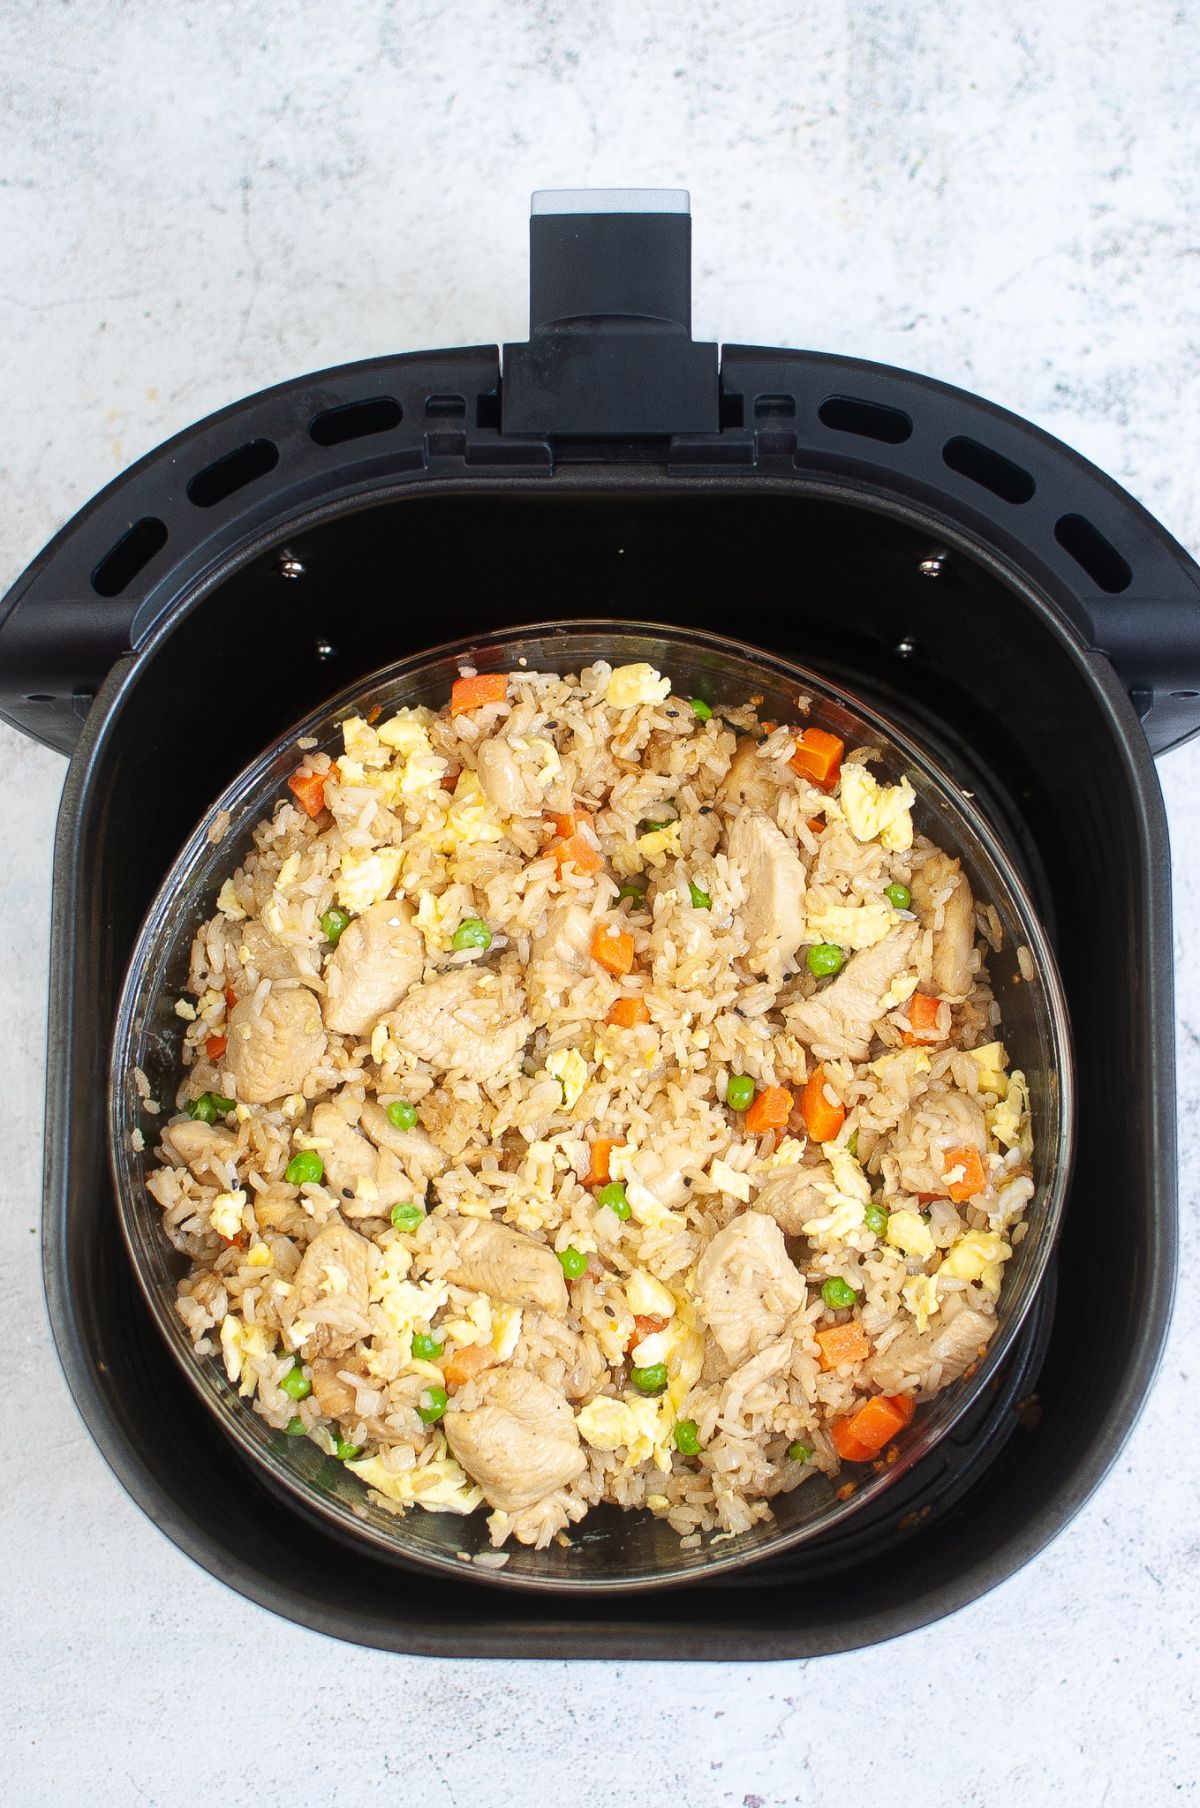 Fried rice with vegetables inside the Air Fryer.